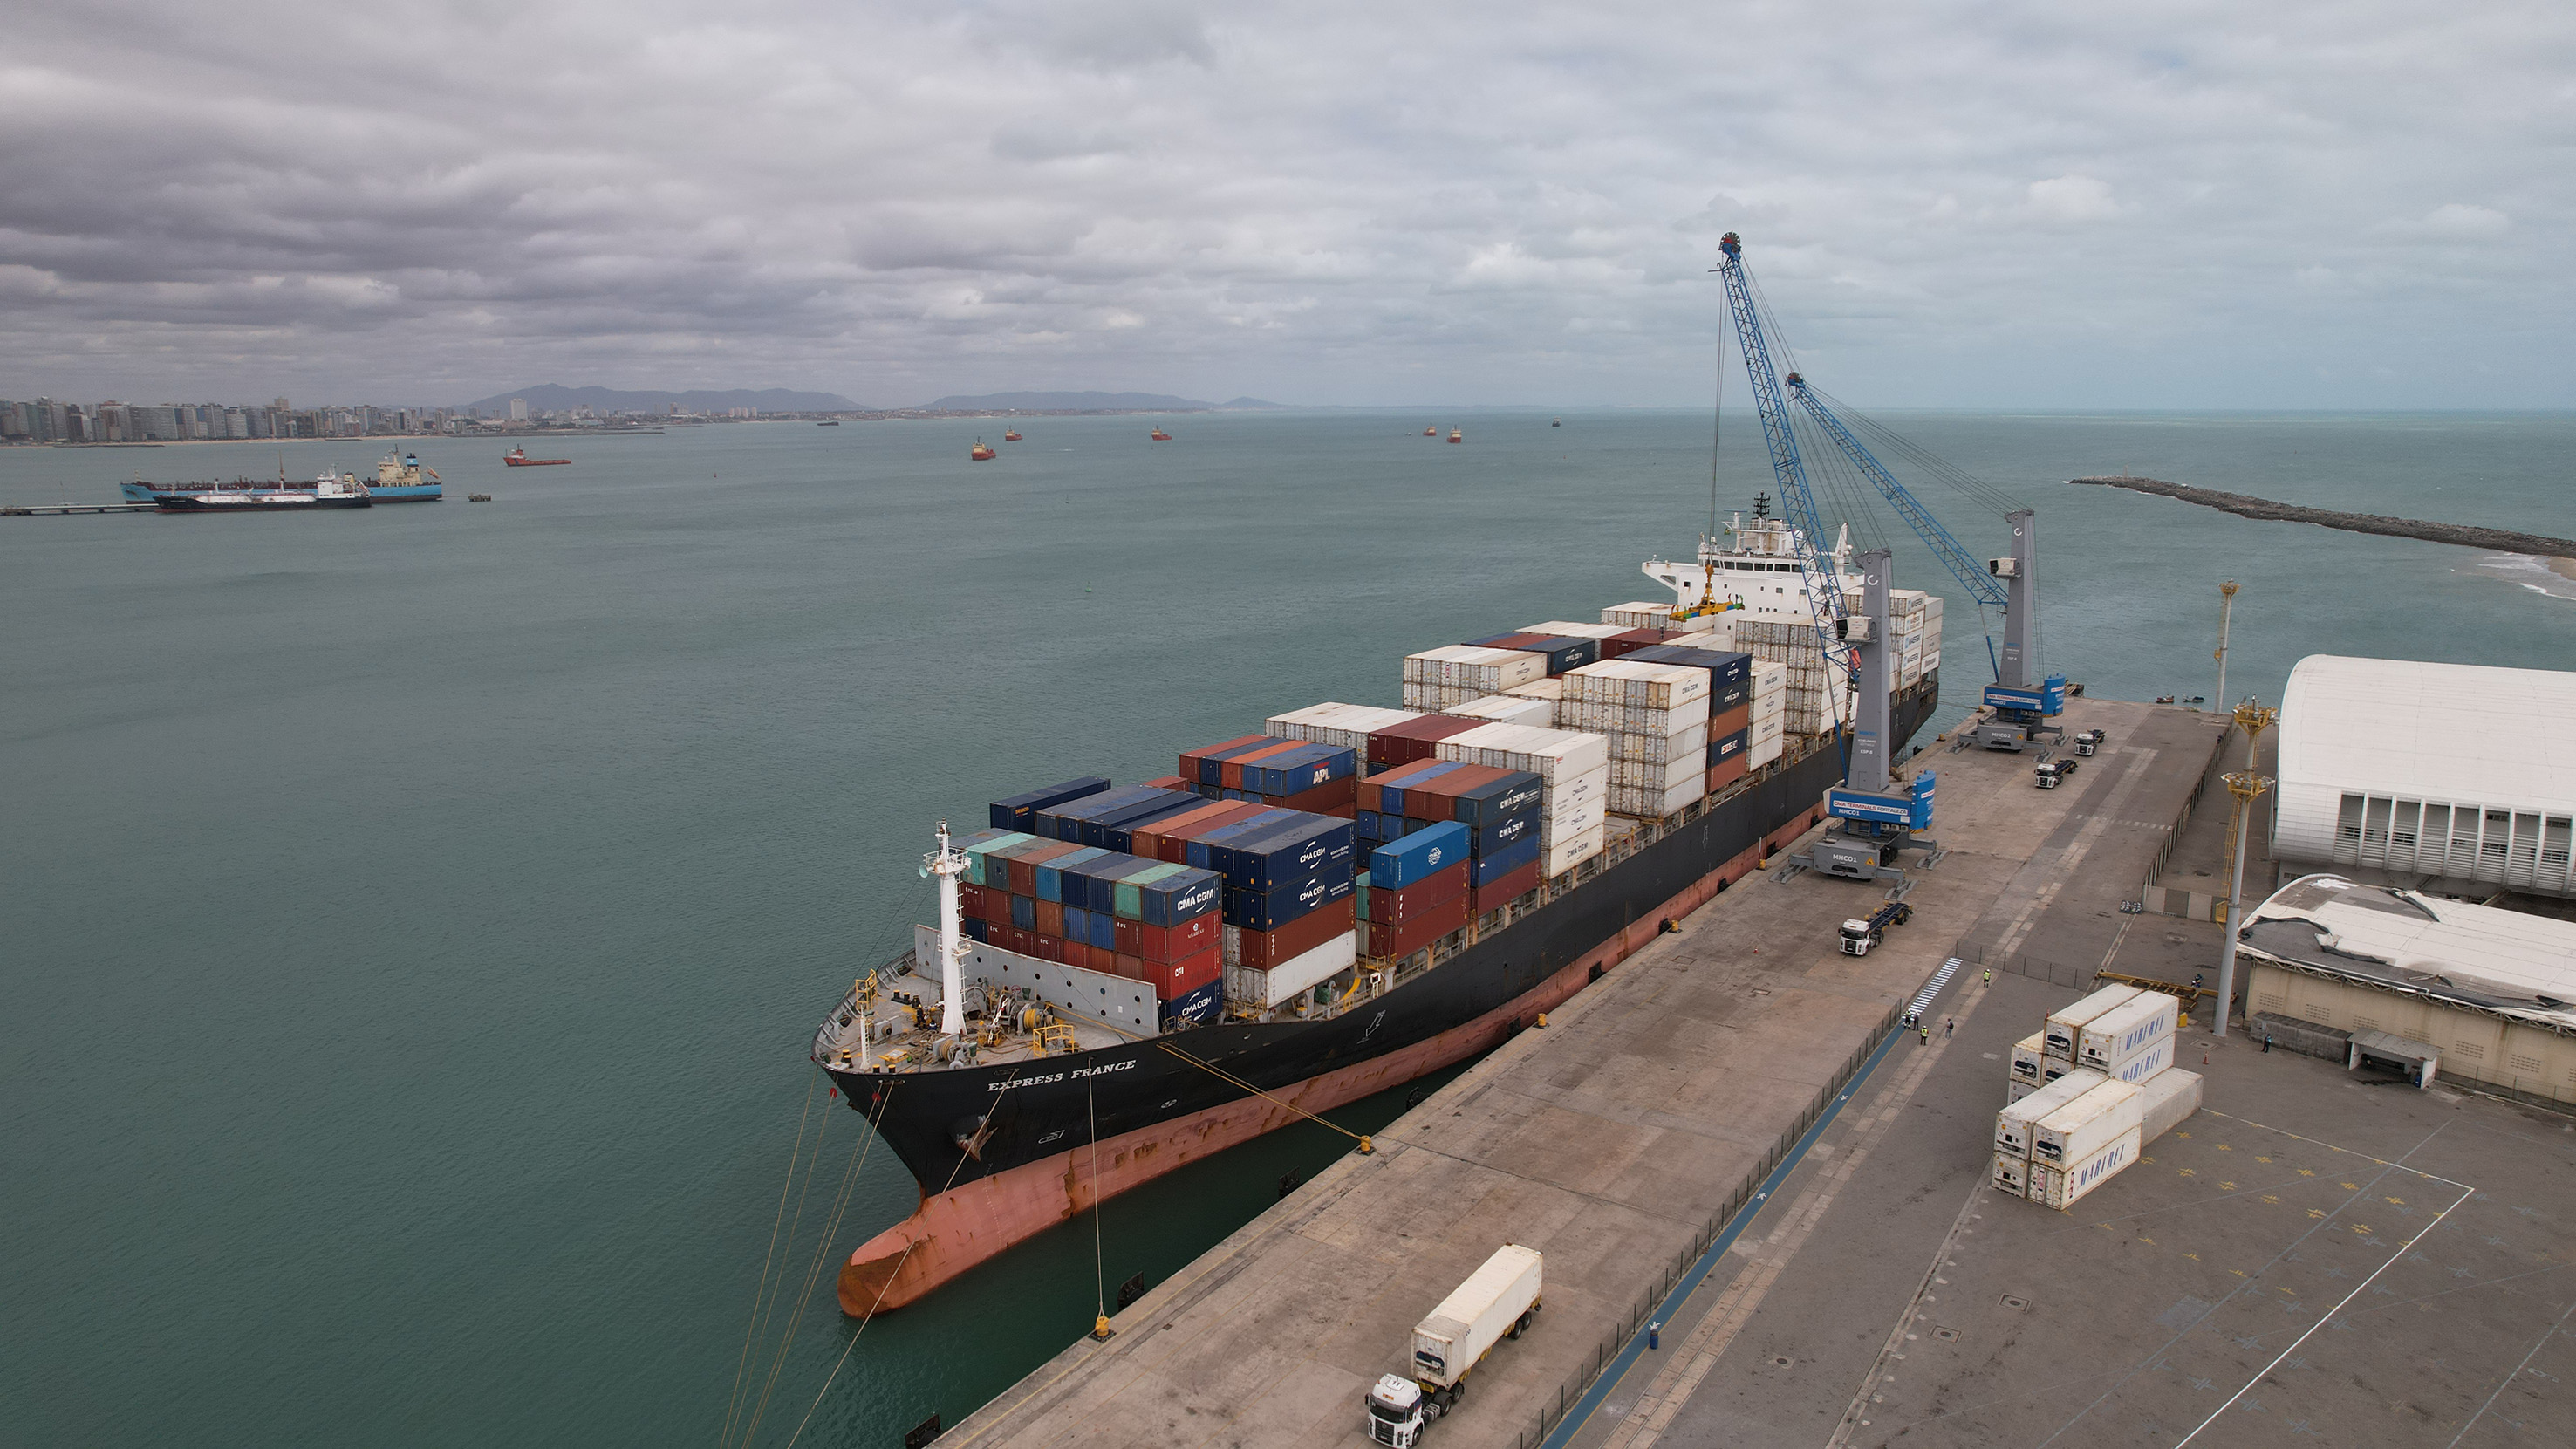 Konecranes delivers two Generation 6 mobile harbor cranes to port expansion project in Brazil